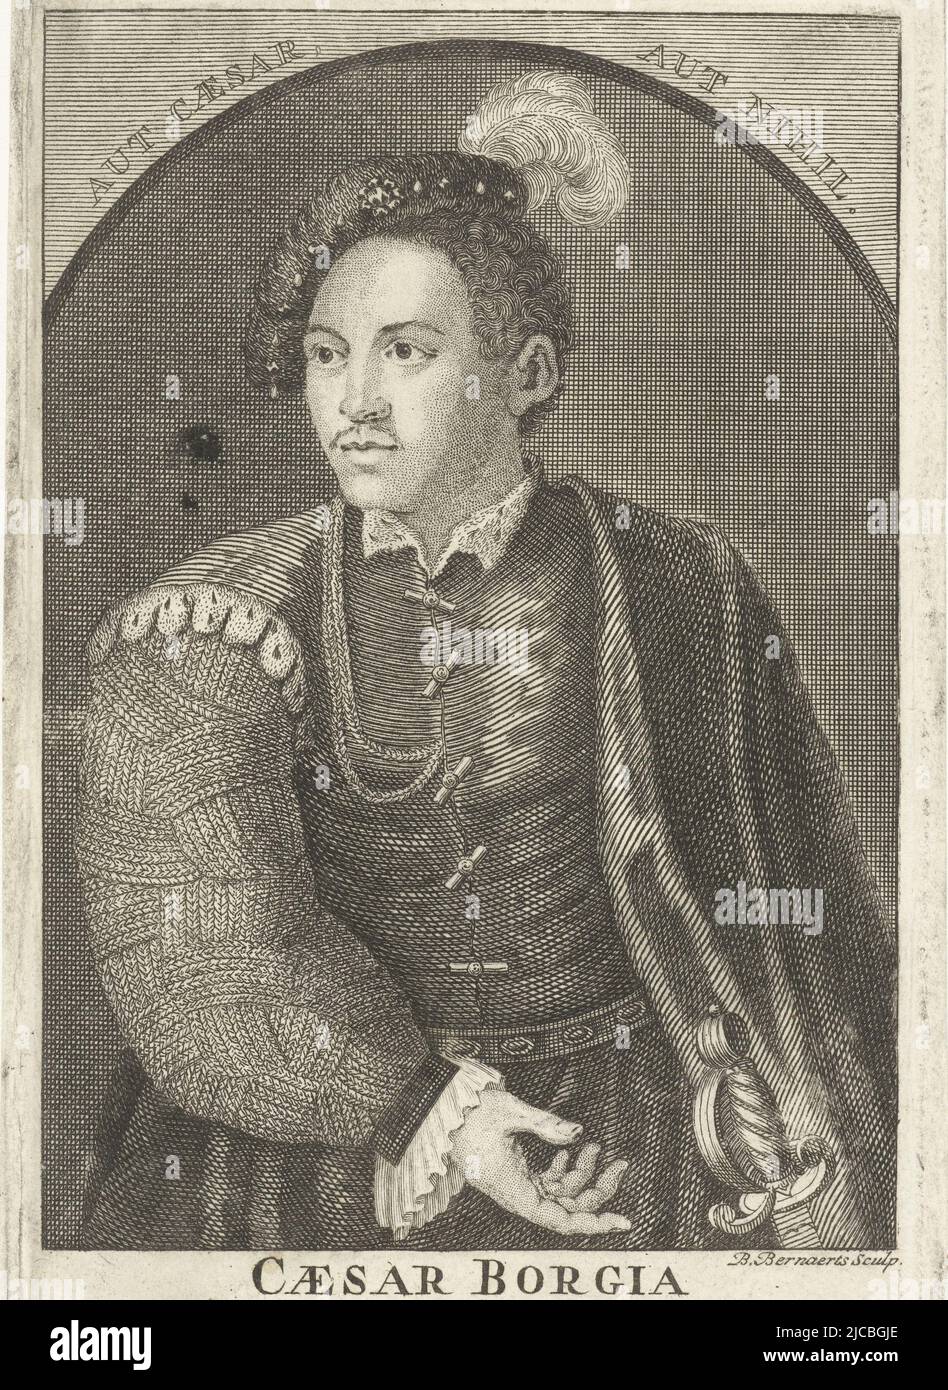 Portrait of Cesare Borgia with sword and beret Below the portrait a verse in Latin, Portrait of Cesare Borgia, print maker: Balthasar Bernards, (mentioned on object), Amsterdam, 1732, paper, etching, h 143 mm × w 85 mm Stock Photo